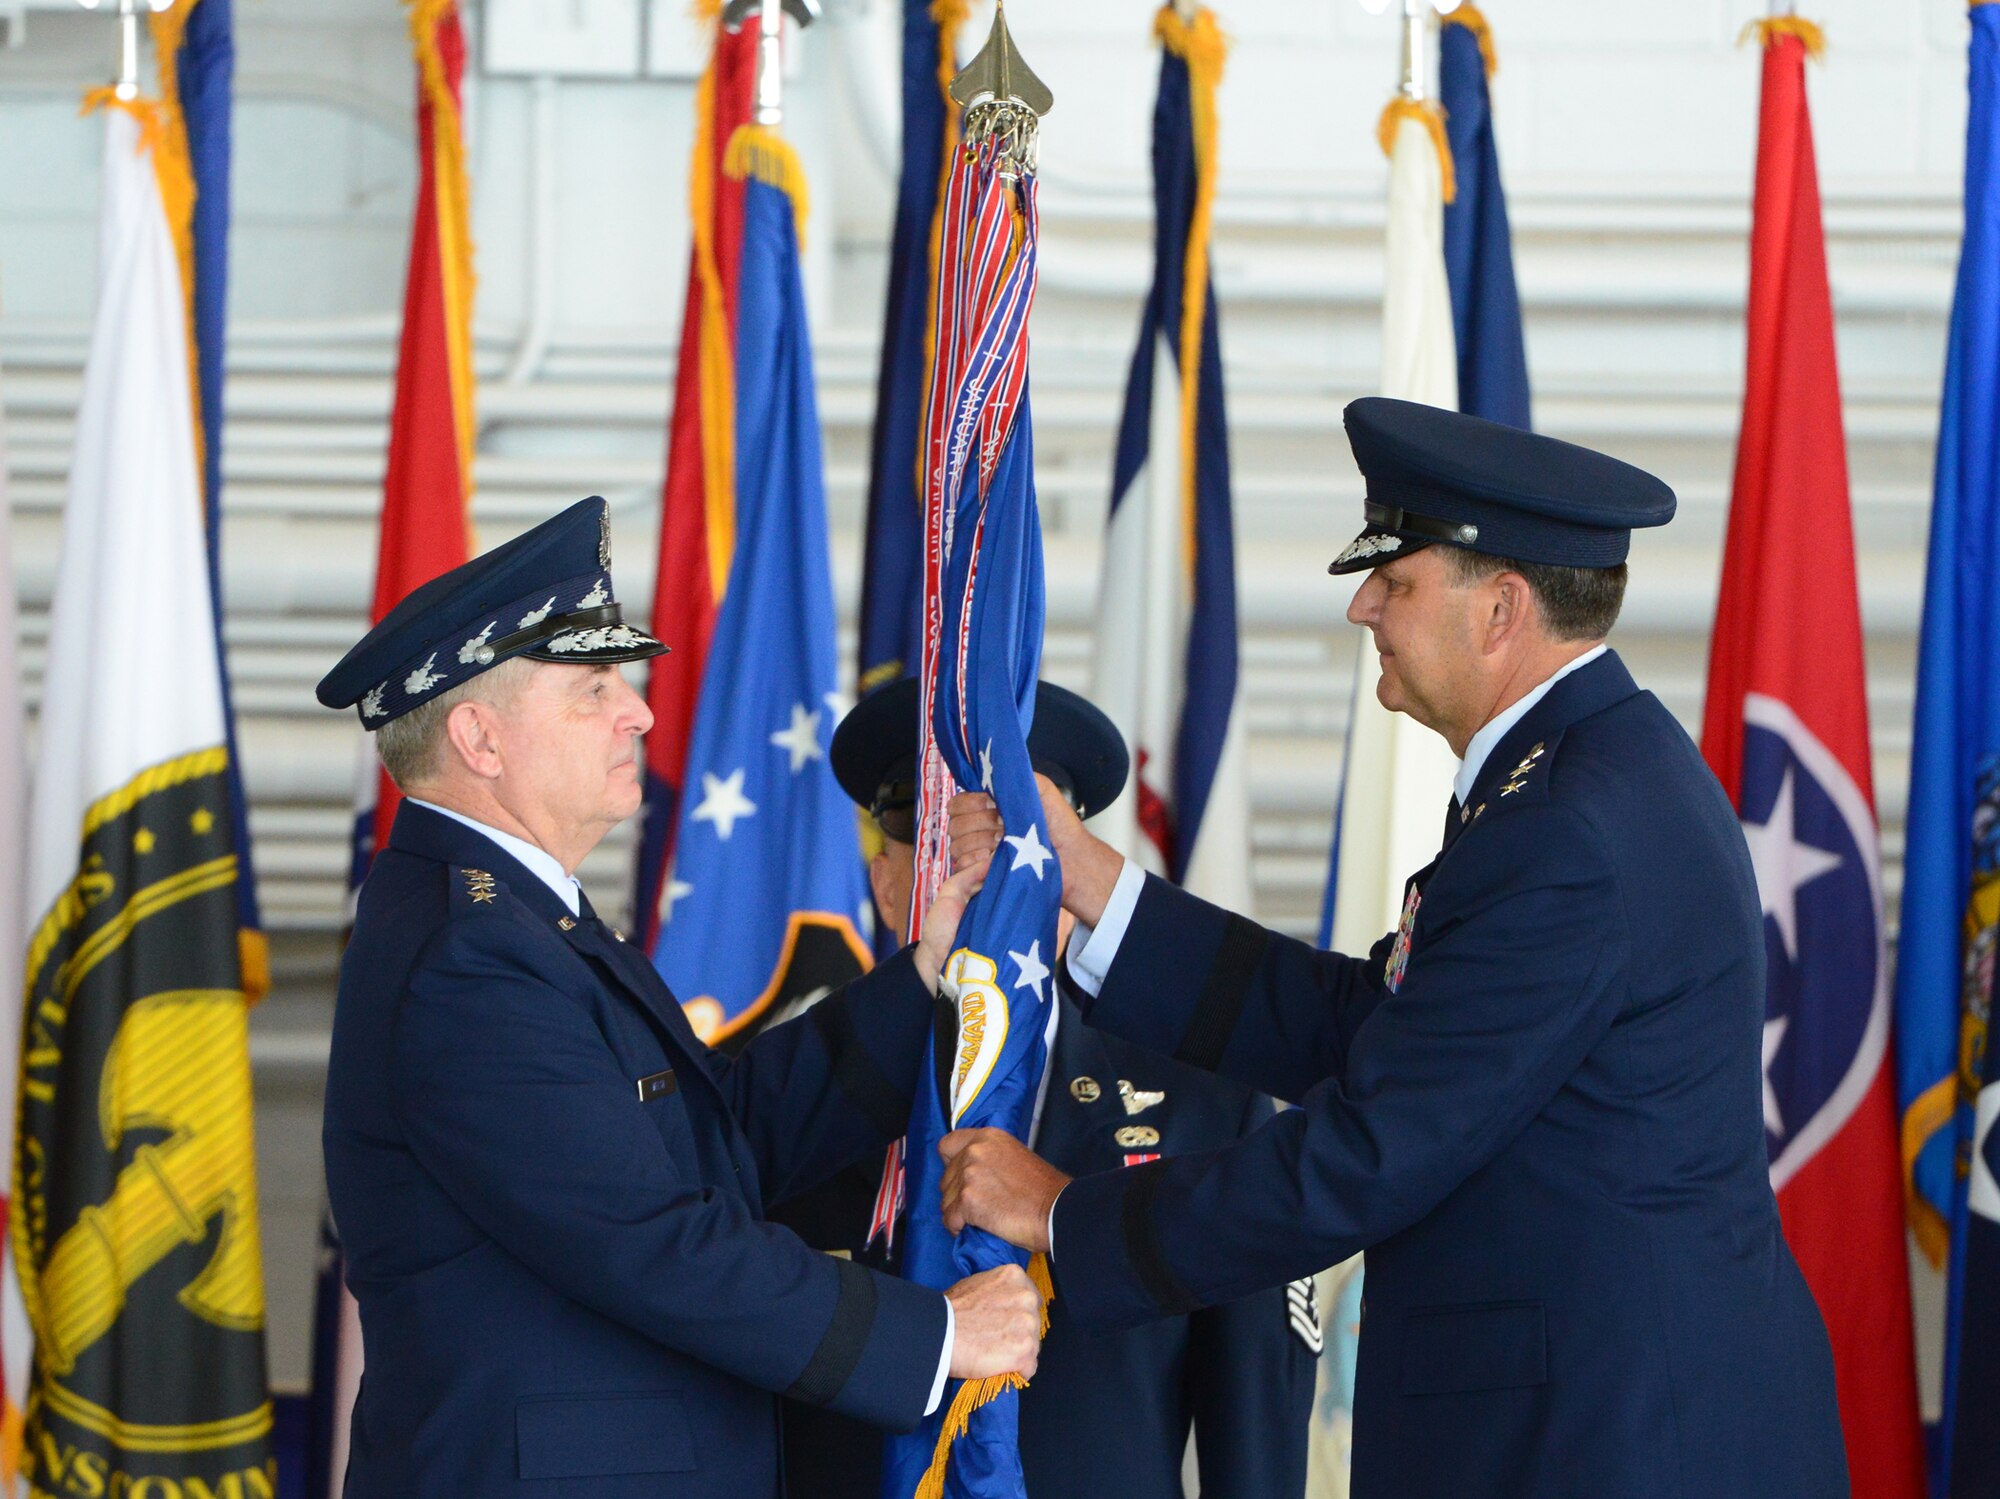 Air Force Chief of Staff Gen. Mark A. Welsh III and Lt. Gen. Bradley A. Heithold pass the Air Force Special Operations Command guidon, making Heithold the 10th commander of AFSOC, during a change of command ceremony held at Hurlburt Field, Fla., July 3, 2014.  Heithold becomes the AFSOC commander after a three-year tour as the headquarters U.S. Special Operations Command vice commander in Washington, D.C.  (U.S. Air Force photo by Master Sgt. Steven Pearsall)